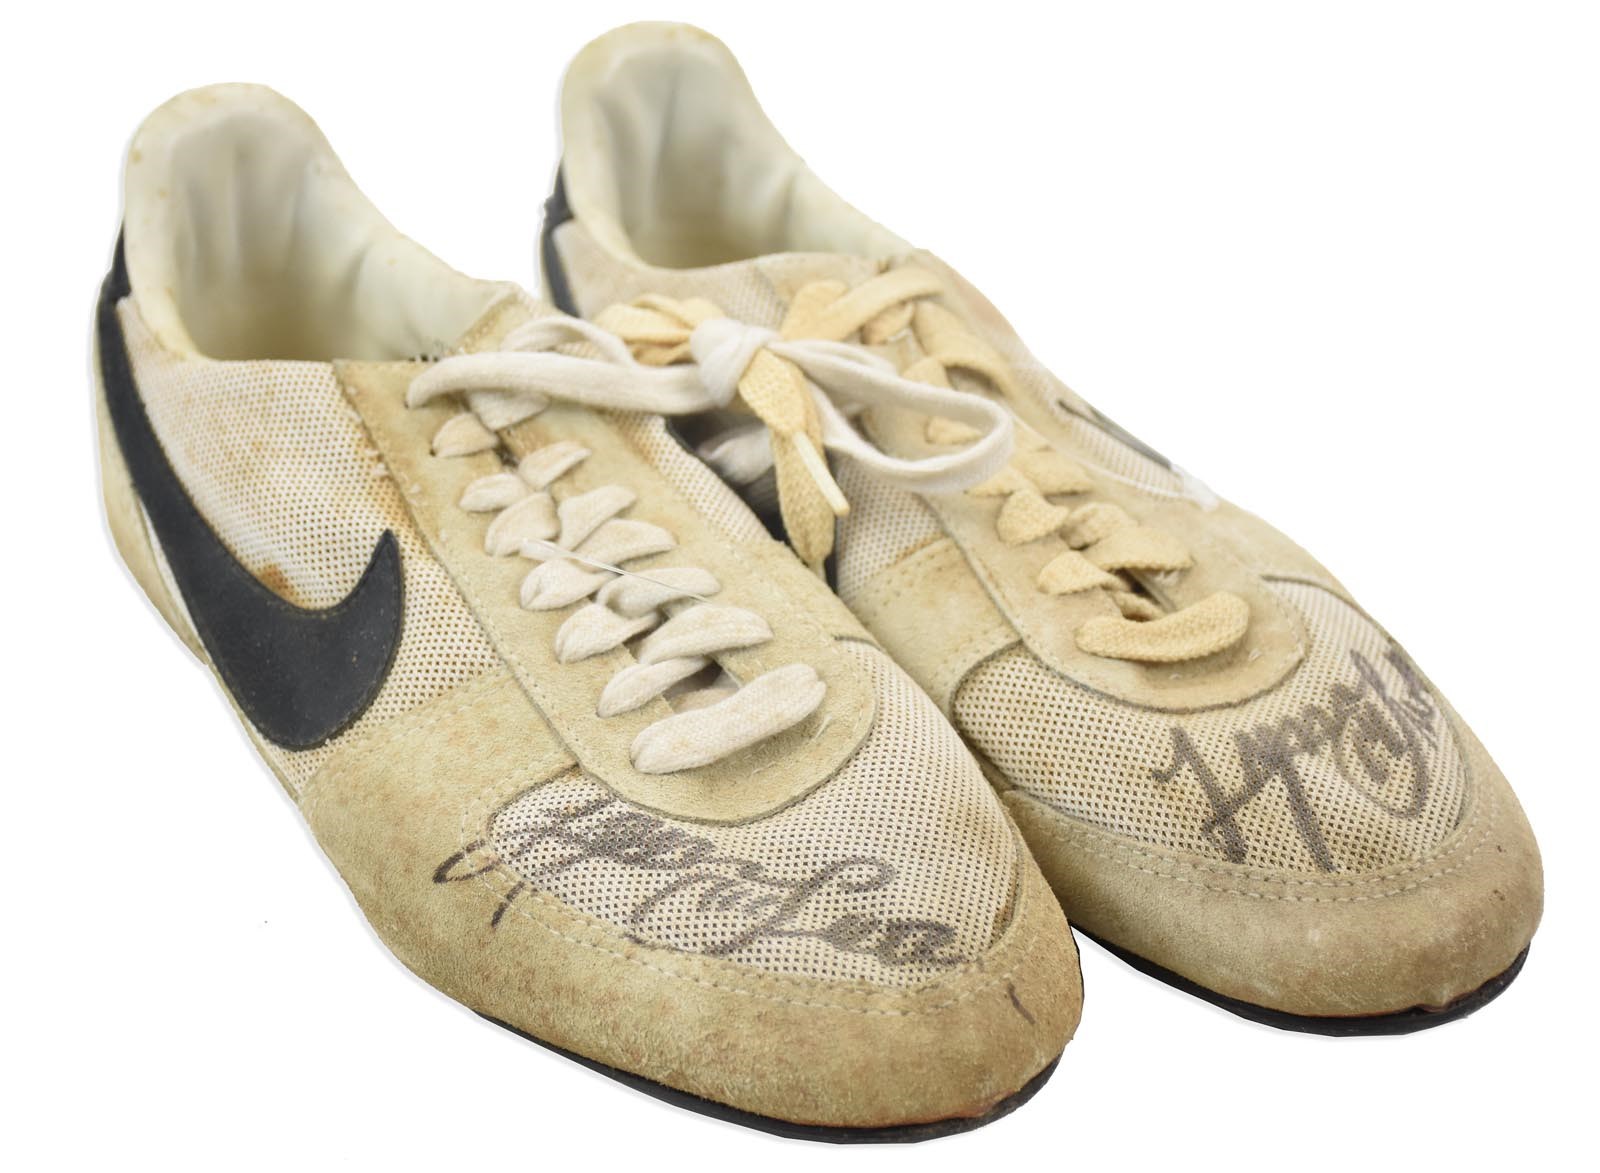 Football - 1970s Lynn Swann Signed Game Worn Steelers Cleats